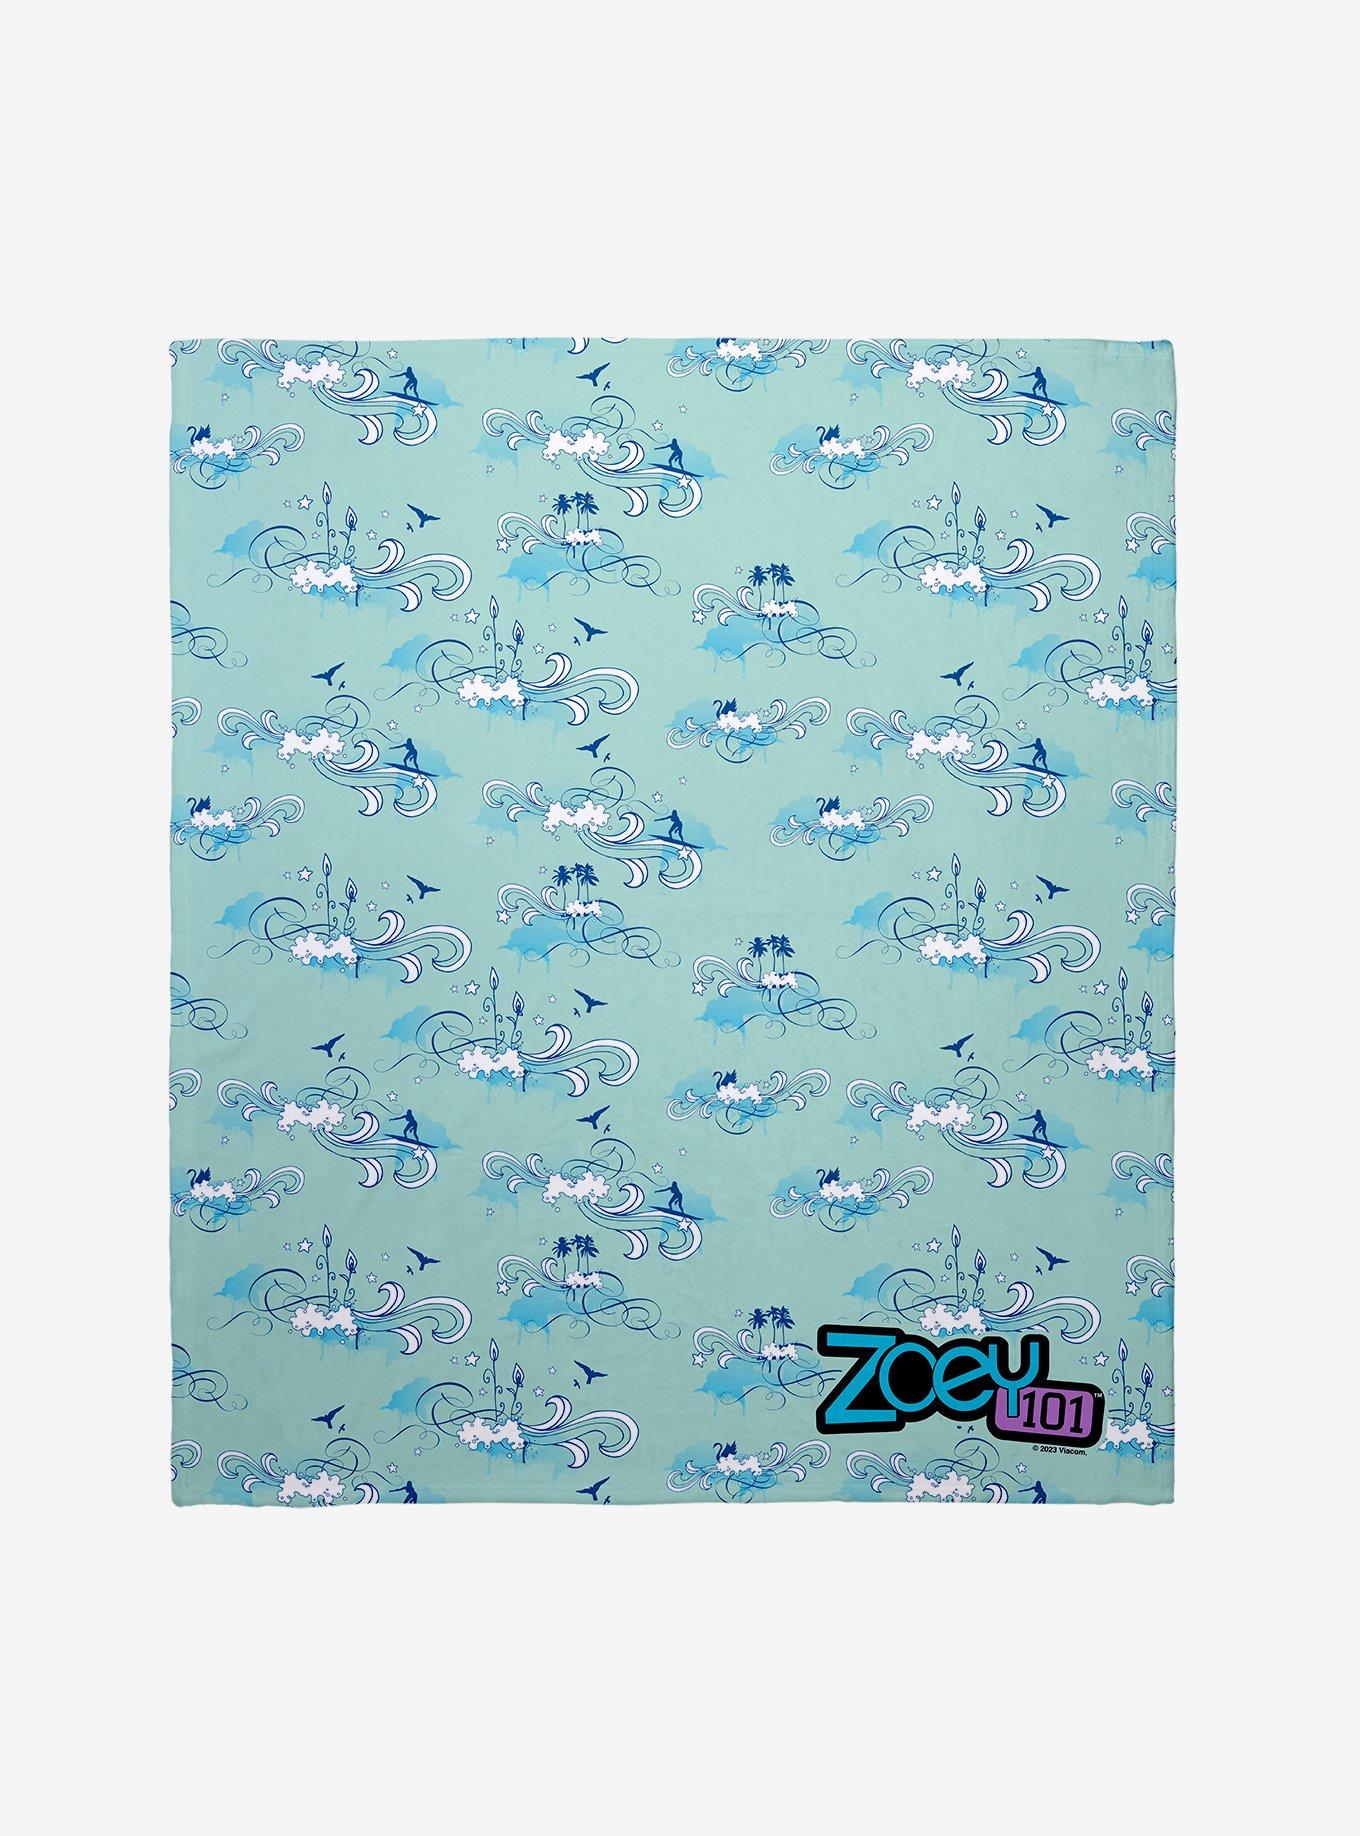 Zoey 101 Palm Trees And Waves Throw Blanket